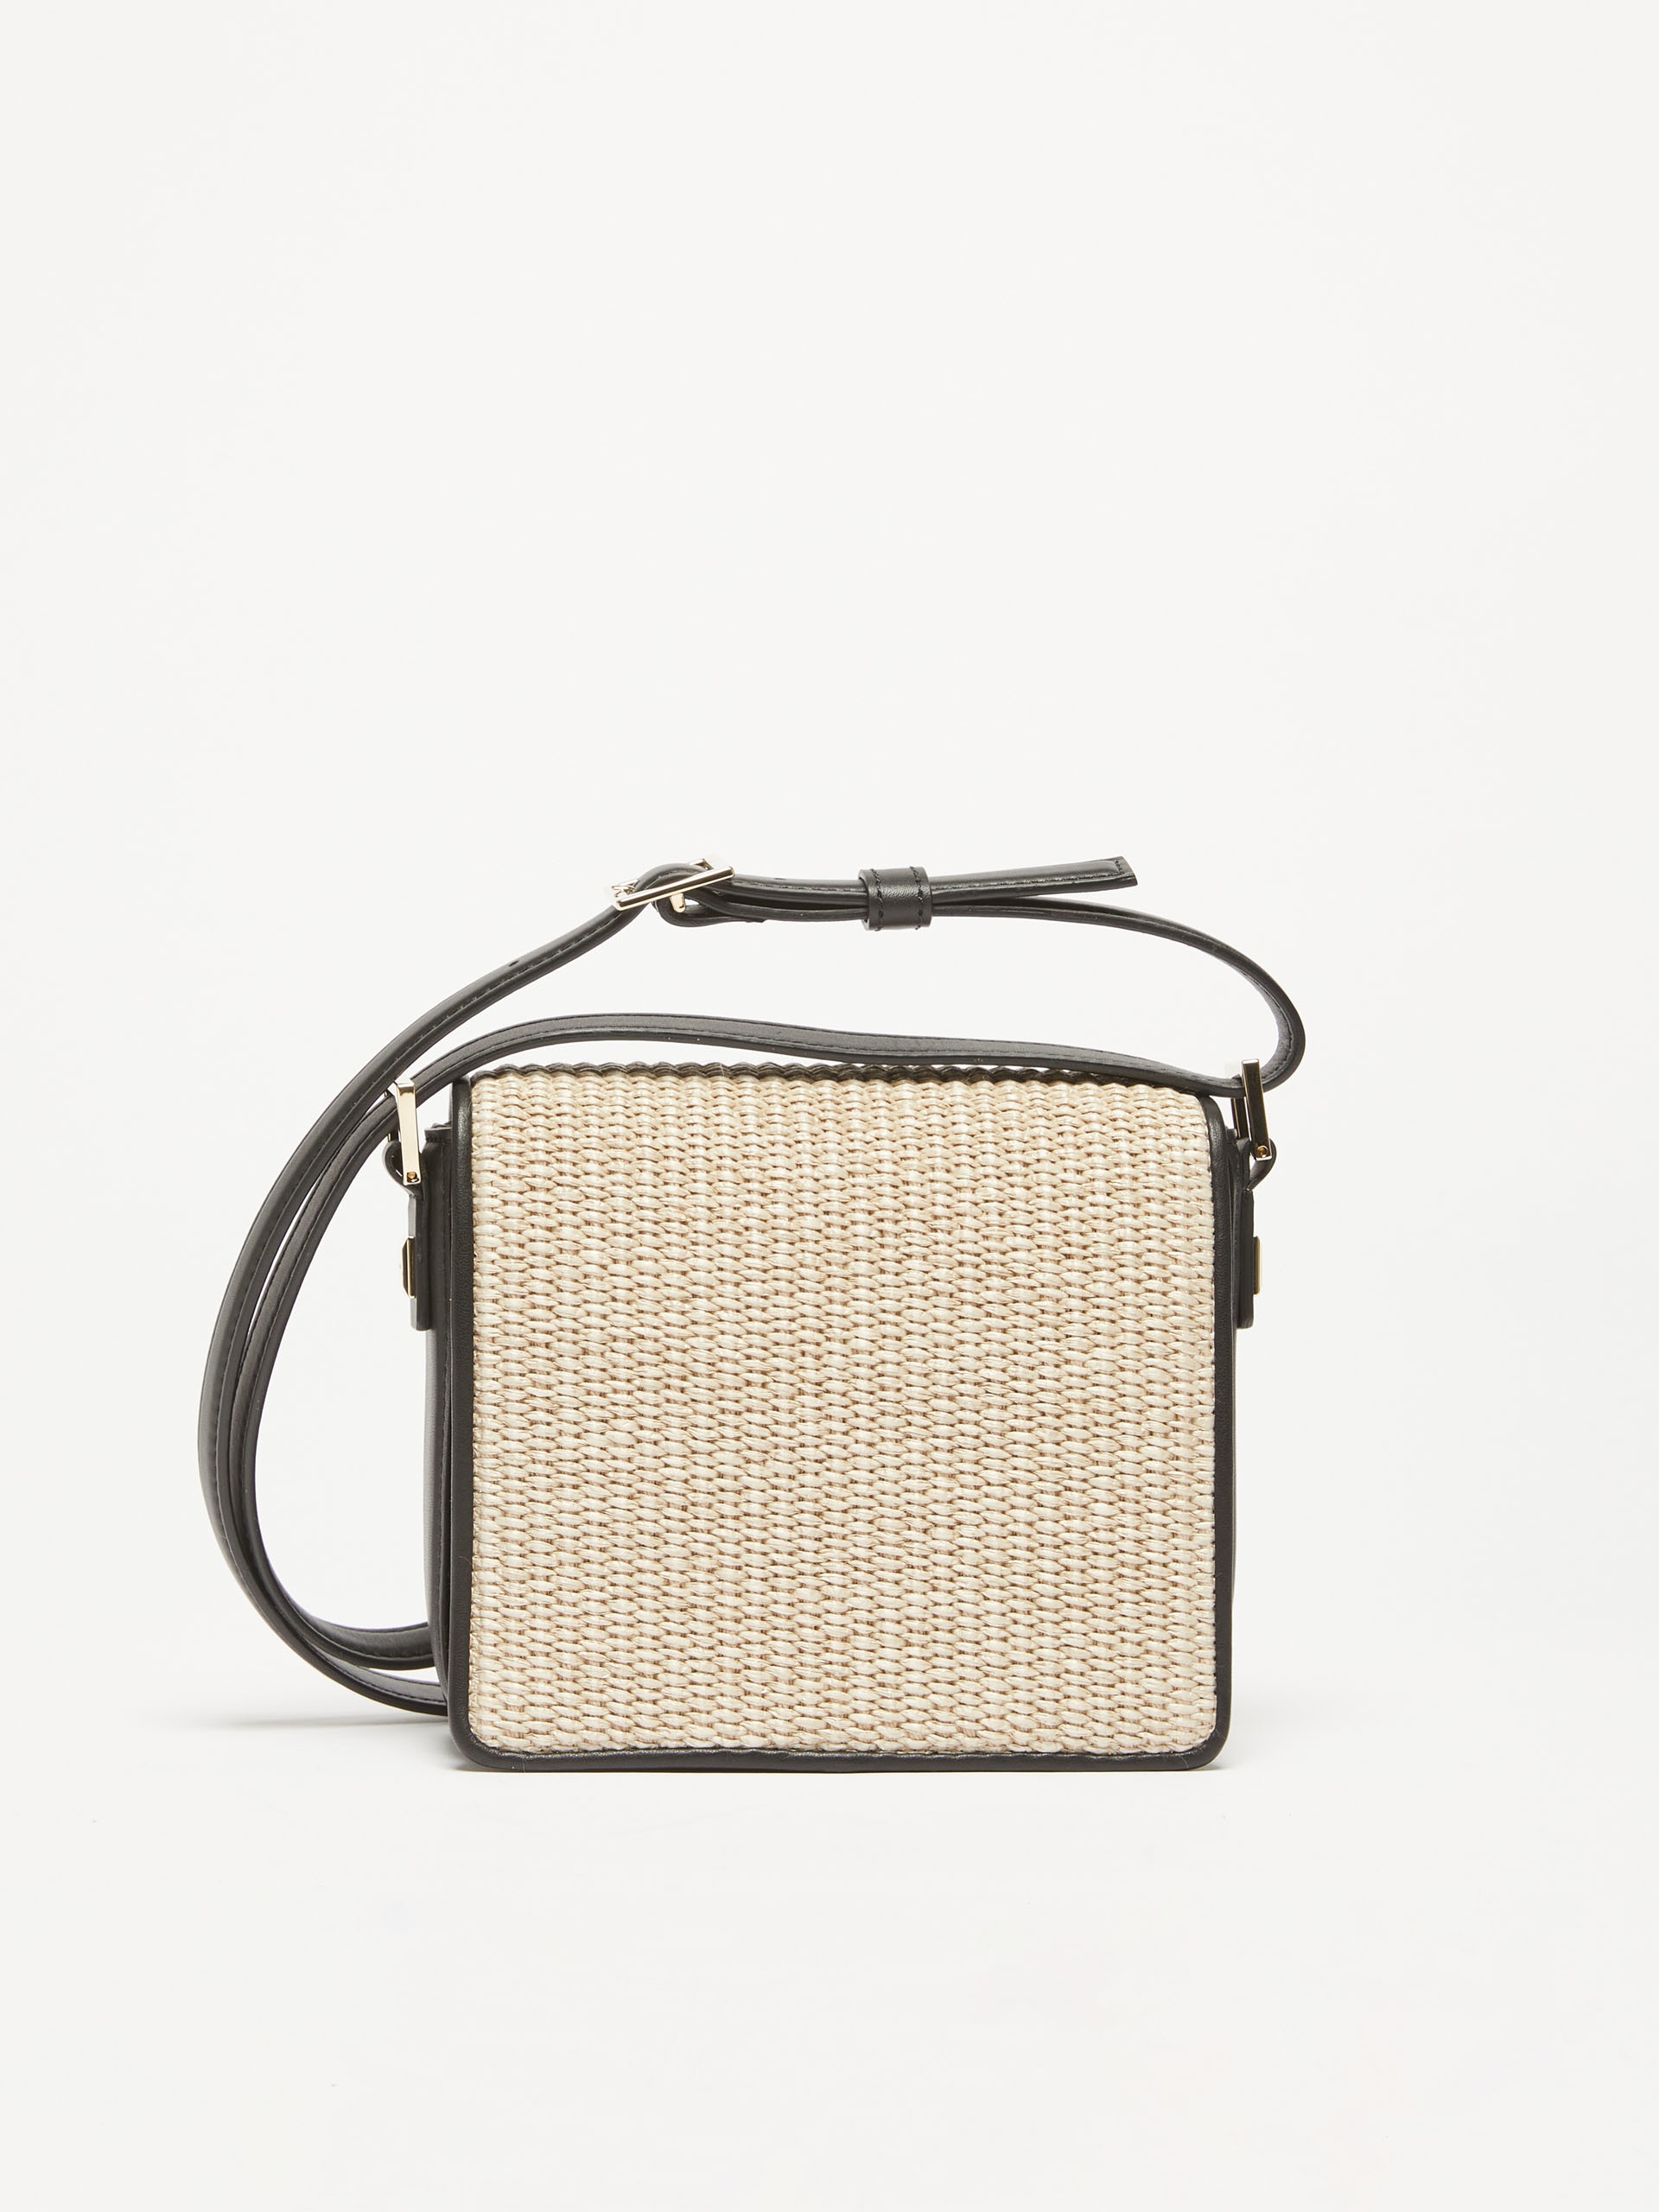 MM Bag in leather and woven fabric - 3